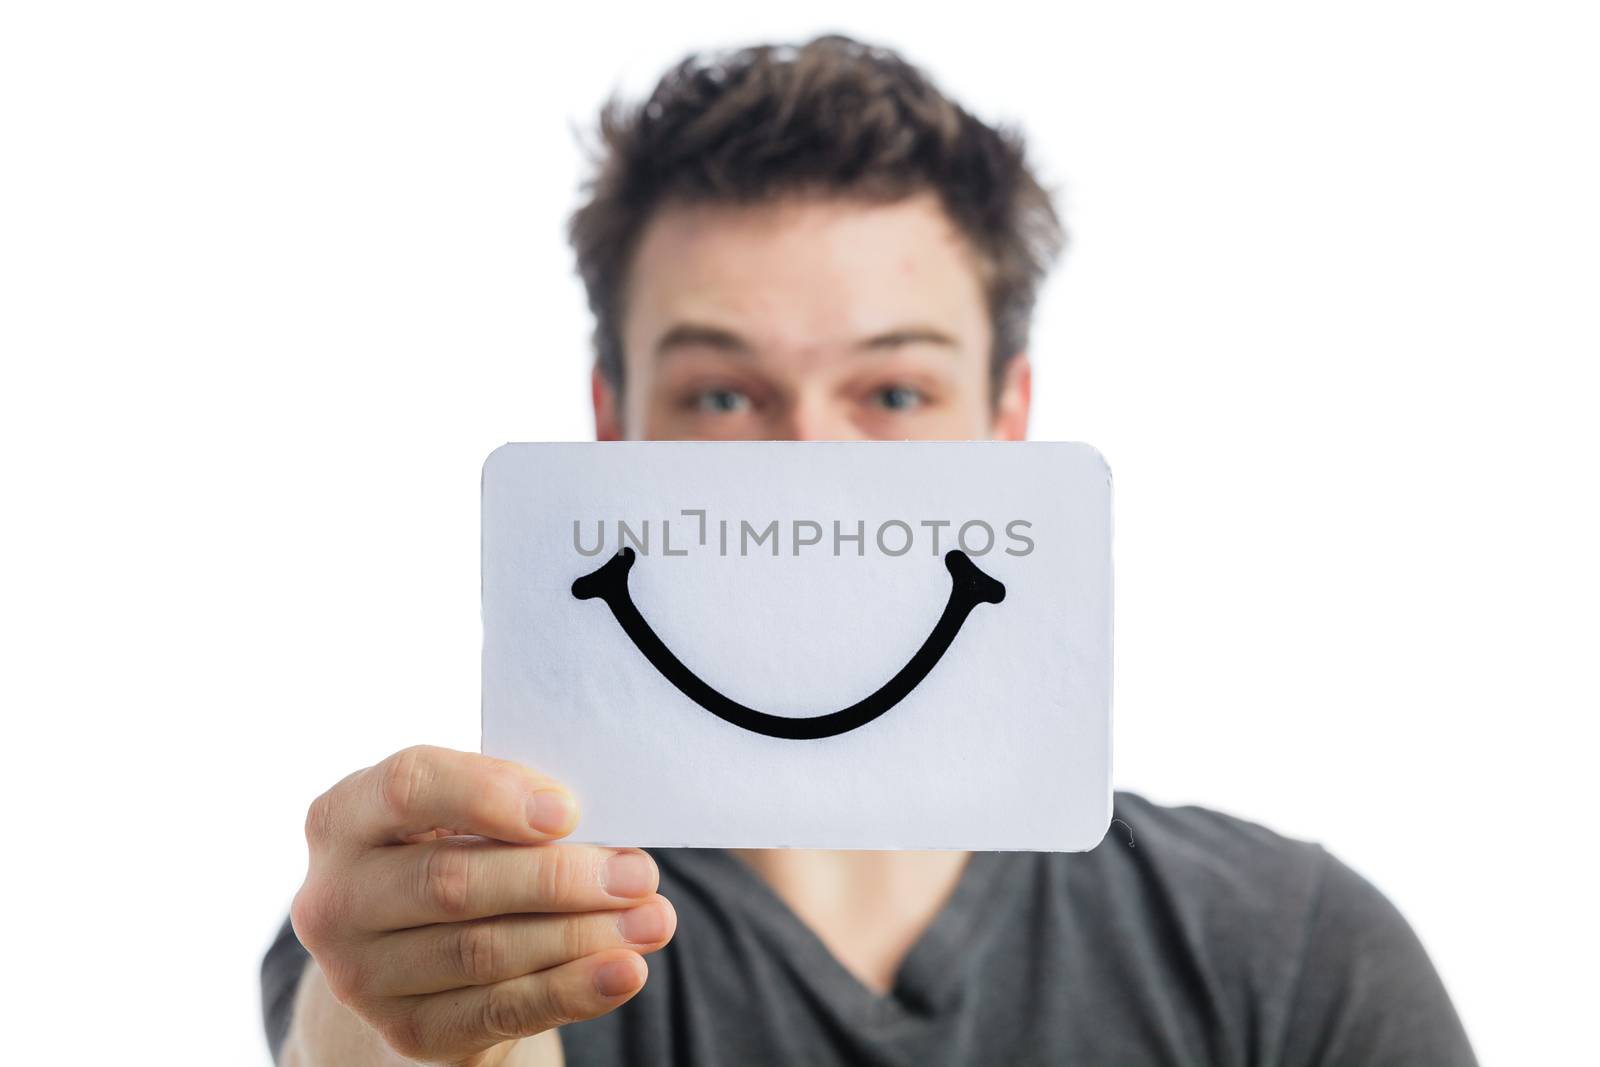 Happy Portrait of Someone Holding a Smiling Mood Board by aetb